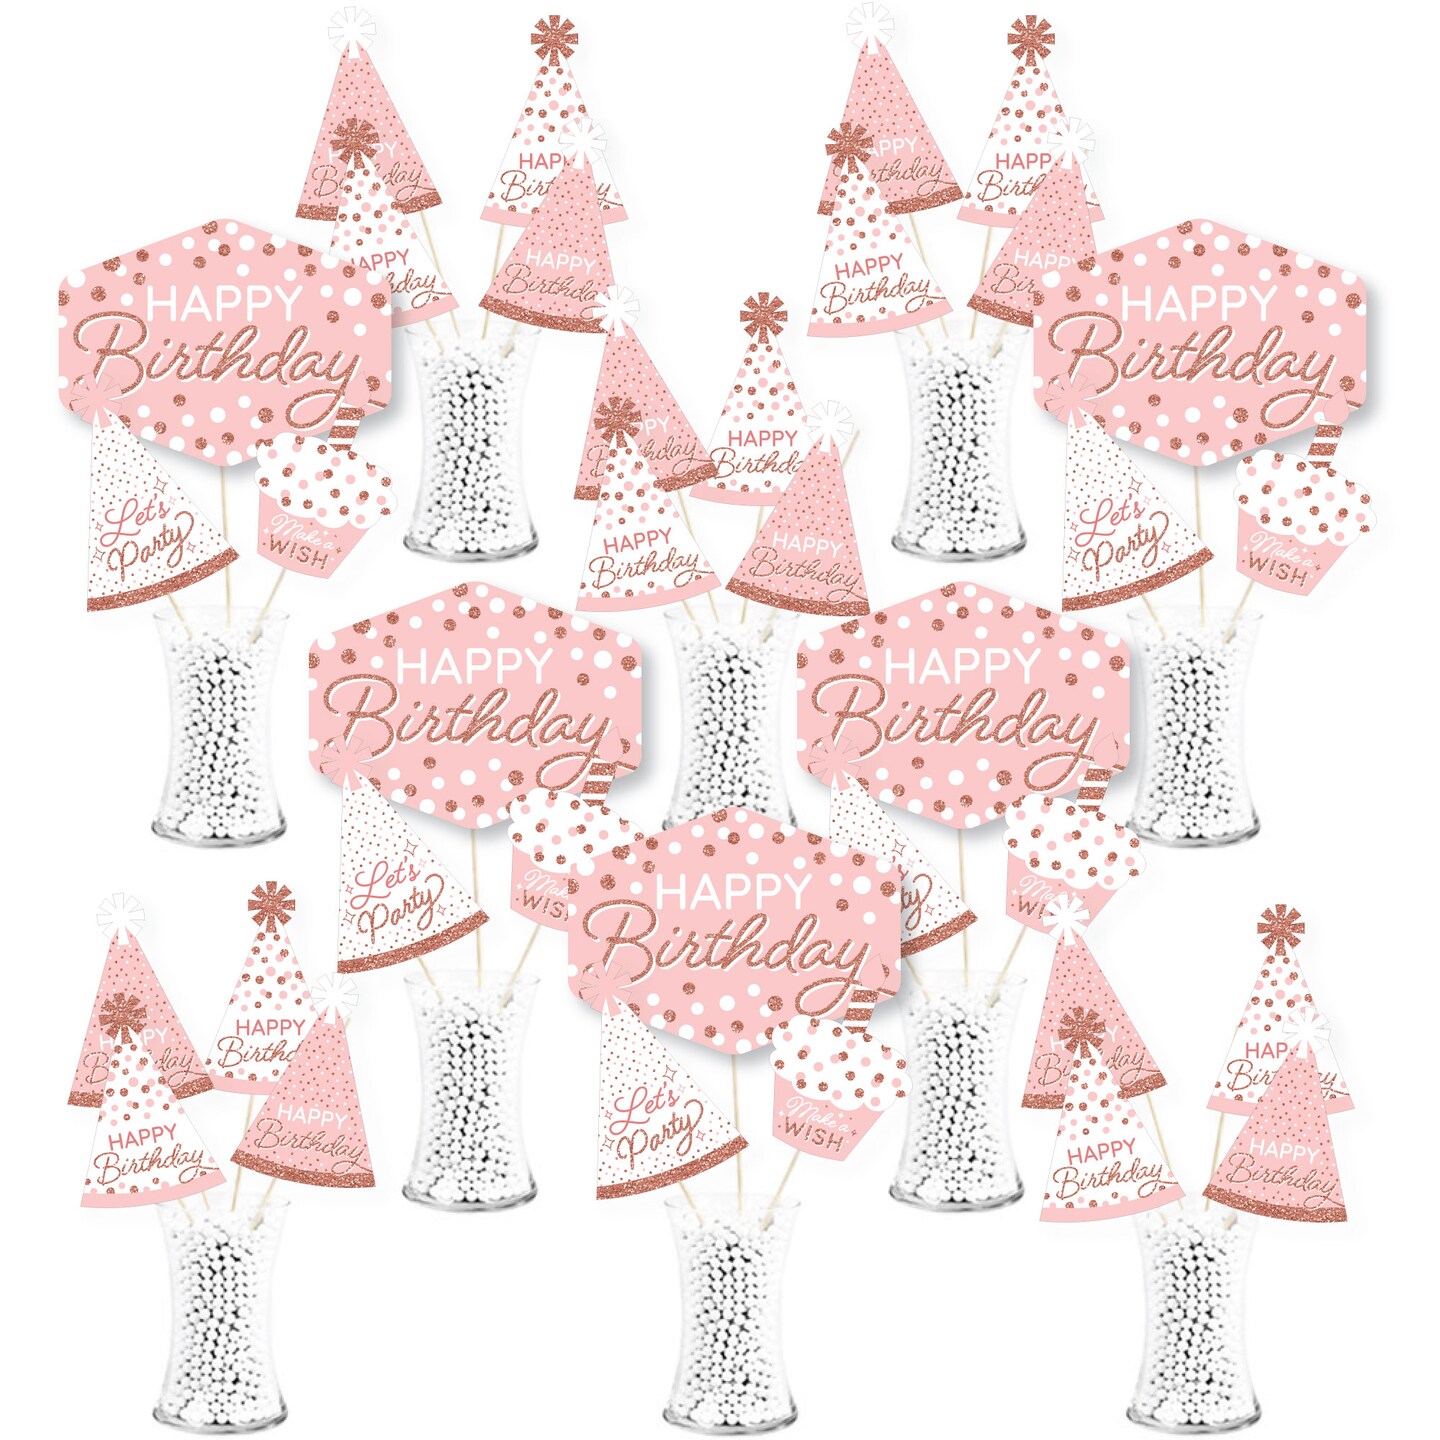 Big Dot of Happiness Pink Rose Gold Birthday - Happy Birthday Party Centerpiece Sticks - Showstopper Table Toppers - 35 Pieces